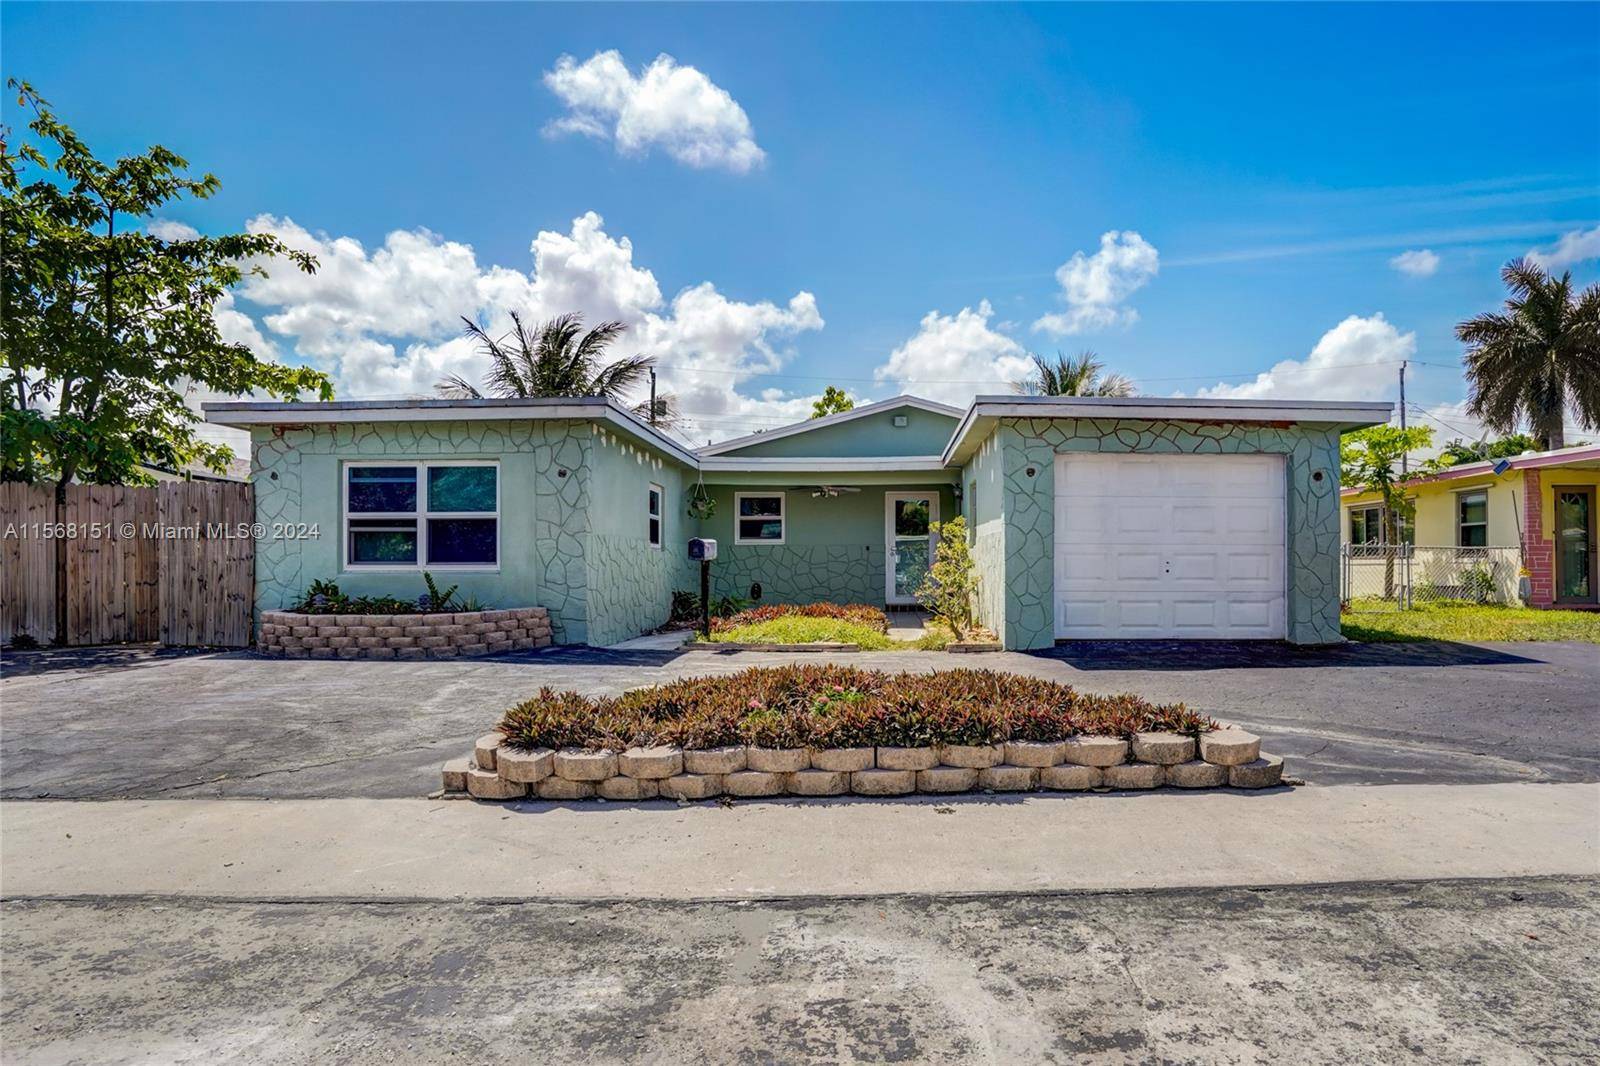 Welcome to your dream home located just a 5 minute drive from the beach, delectable restaurants, convenient grocery stores.